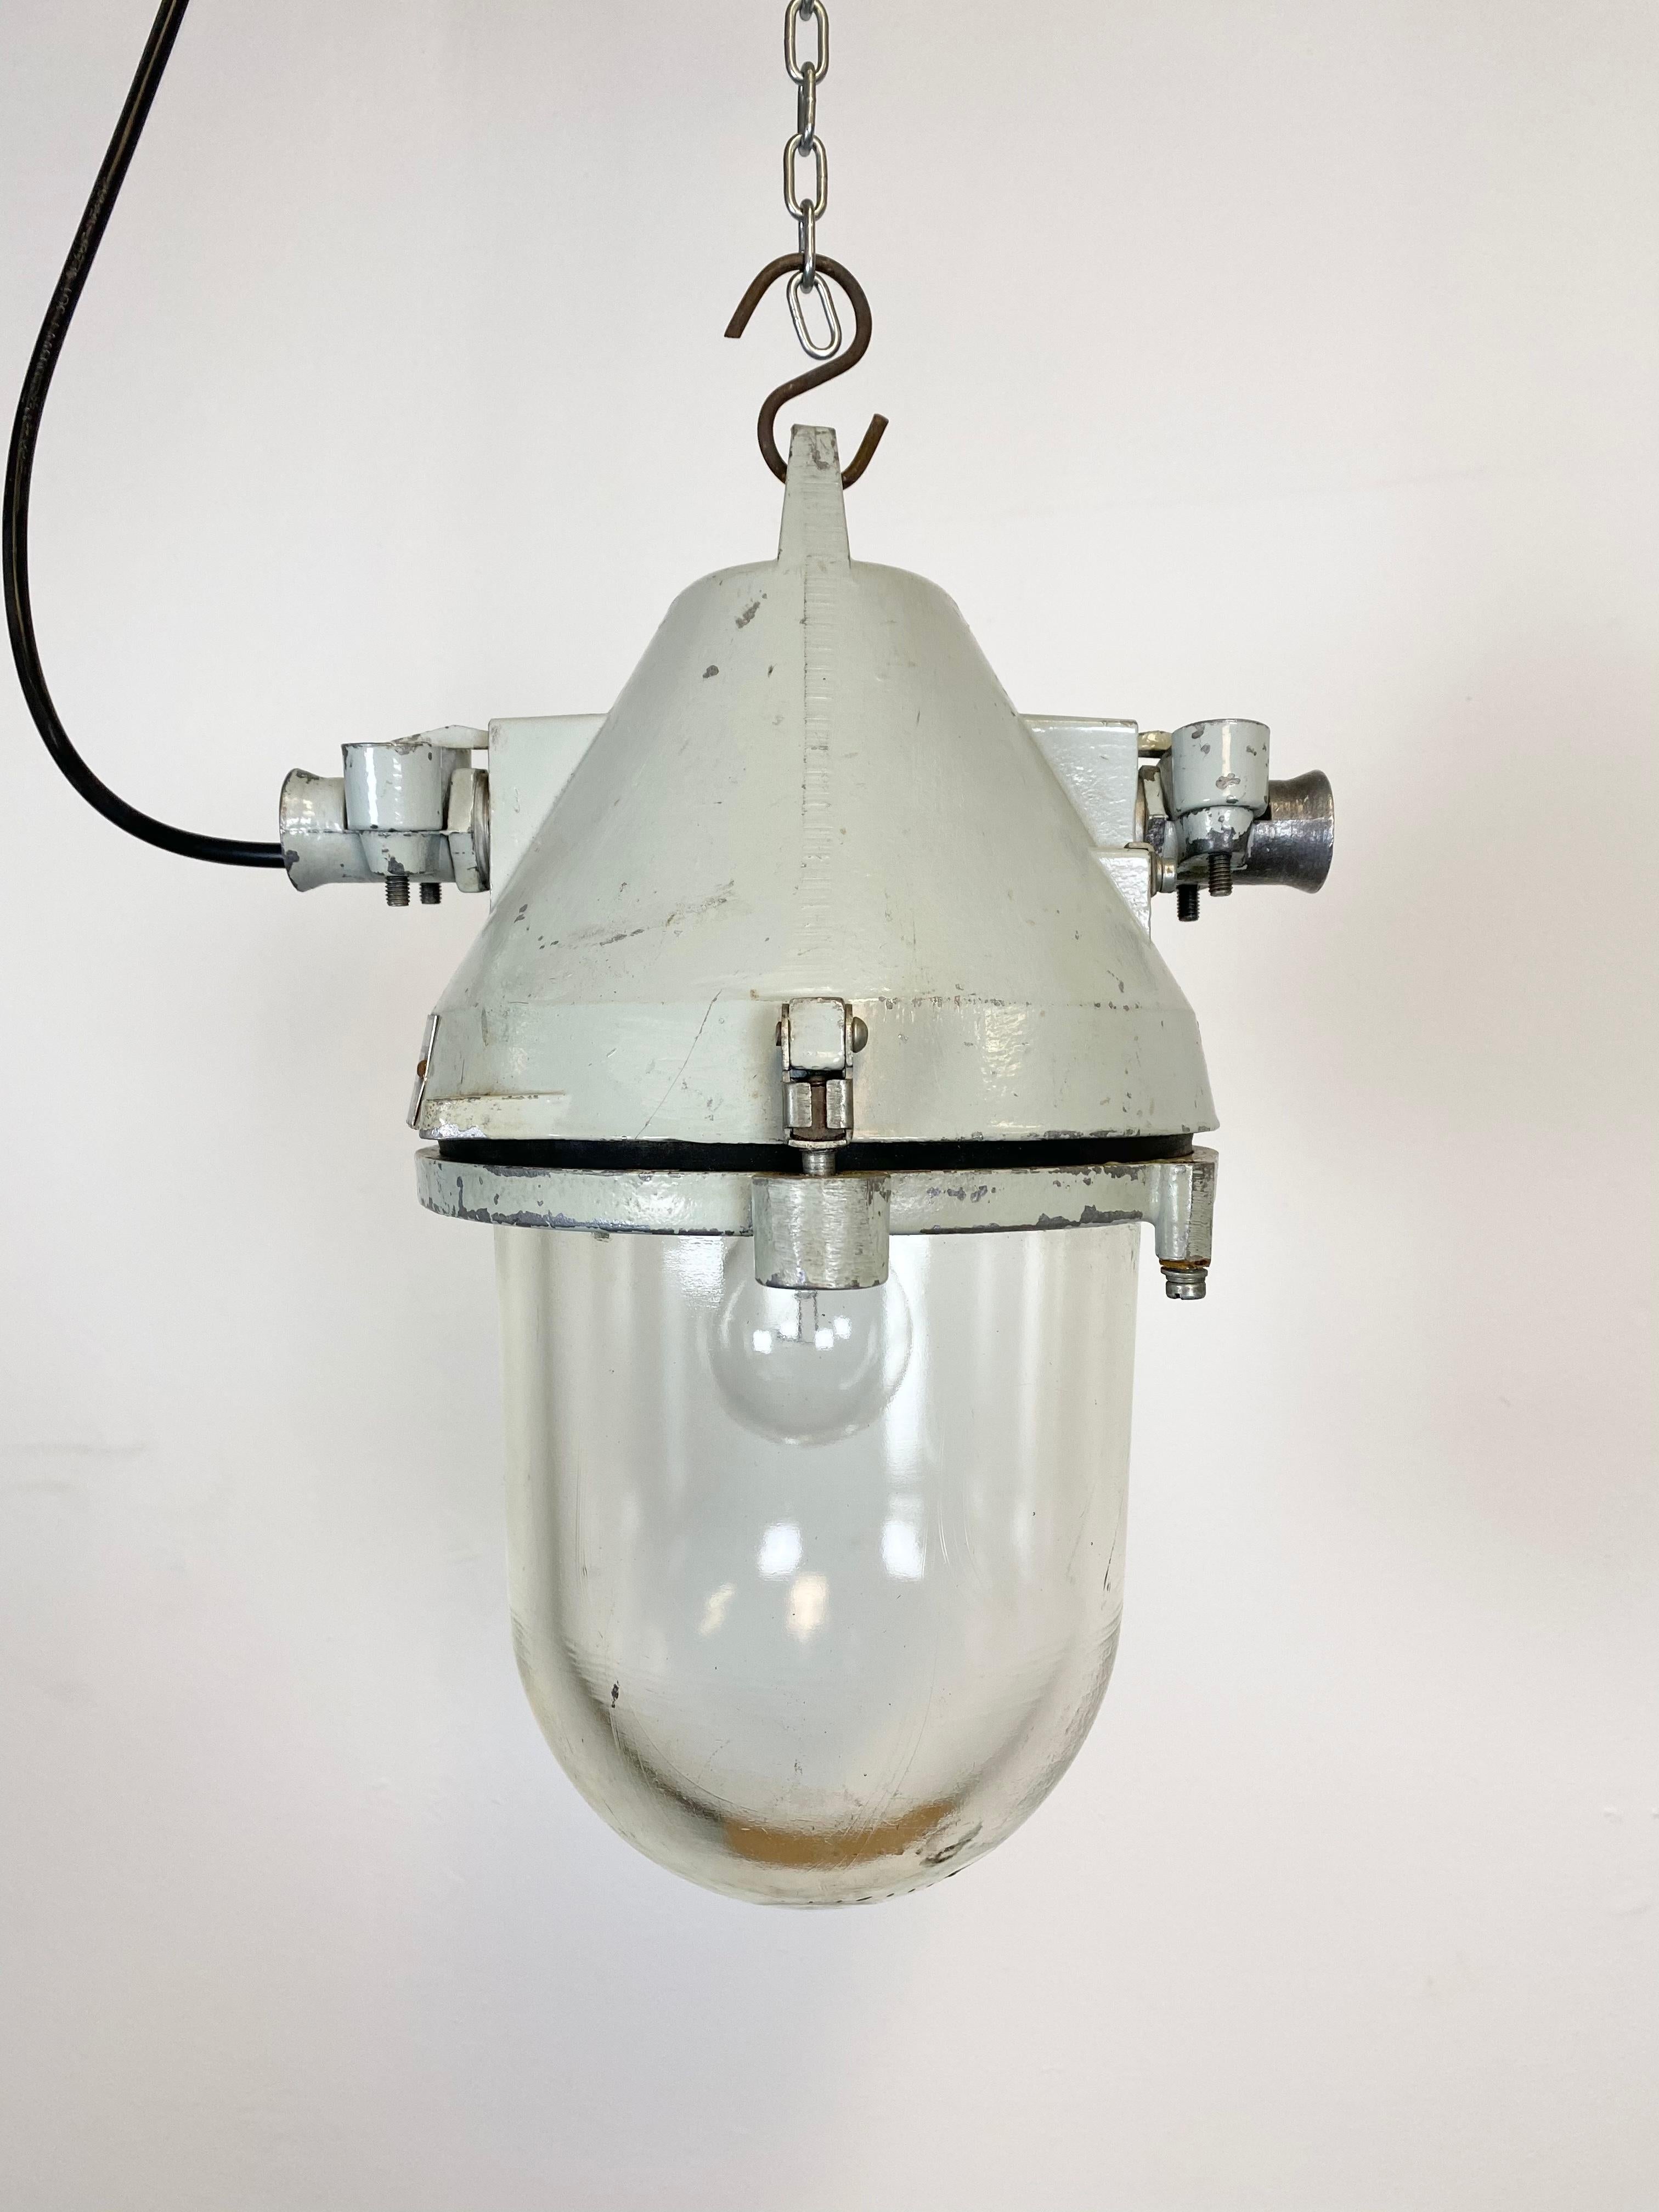 Grey industrial explosion proof light with massive protective glass bulb. Made in former Czechoslovakia by Elektrosvit during the 1970s.It features a cast aluminium body and a clear glass cover. Original porcelain socket requires standard E27/ E26